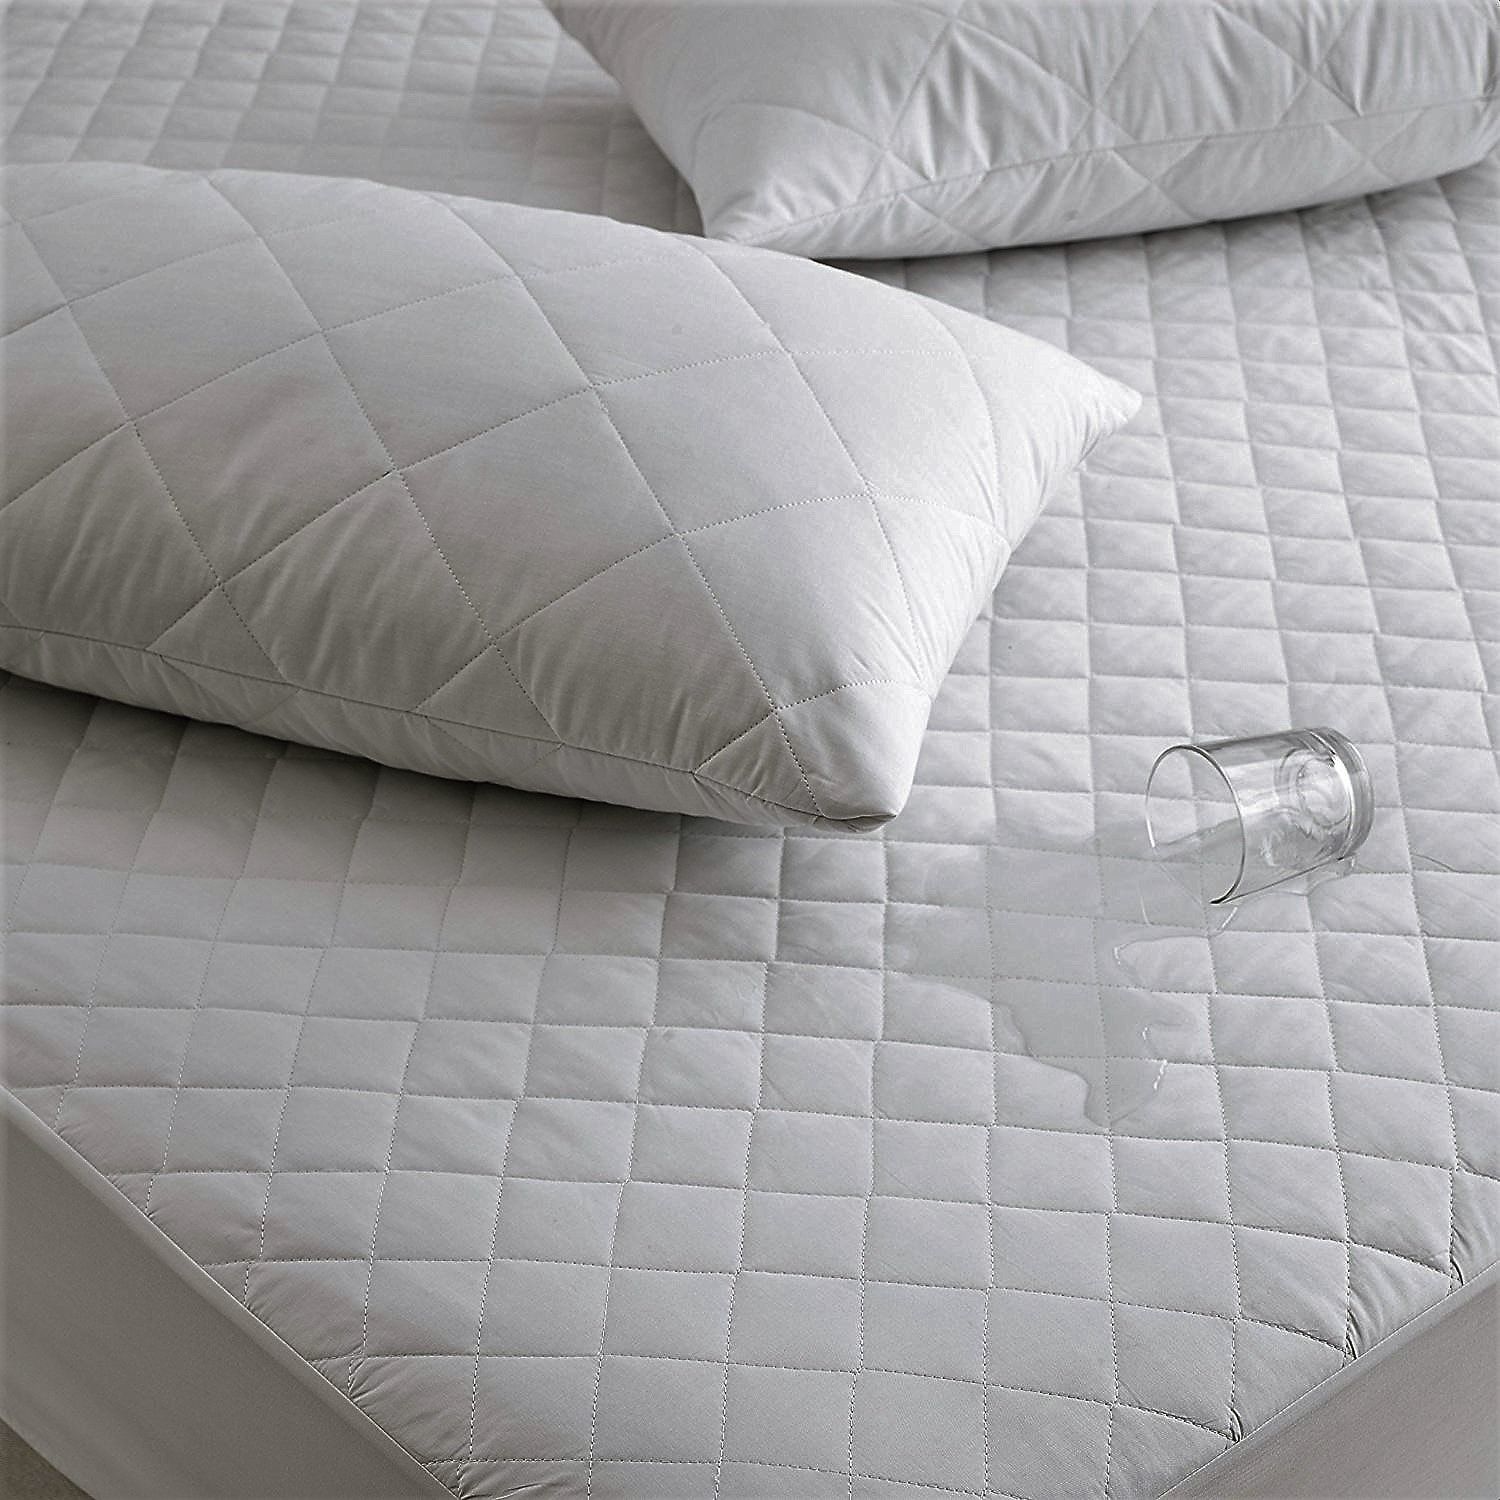 Quilted 100% Cotton Hypoallergenic Waterproof Mattress Protector - Deep Fit 40cm Box